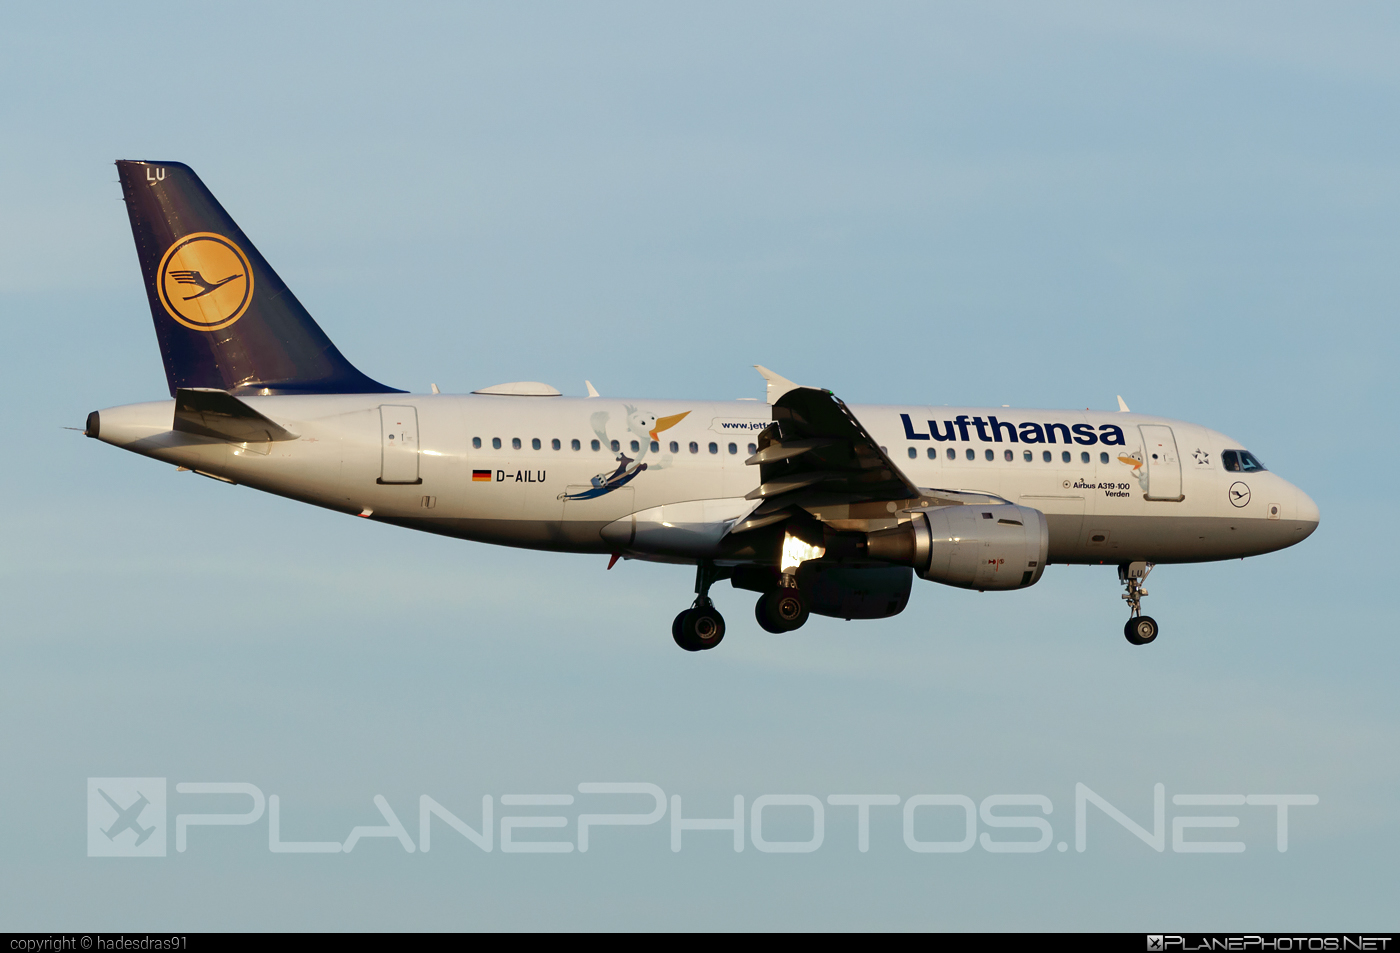 Airbus A319-114 - D-AILU operated by Lufthansa #a319 #a320family #airbus #airbus319 #lufthansa